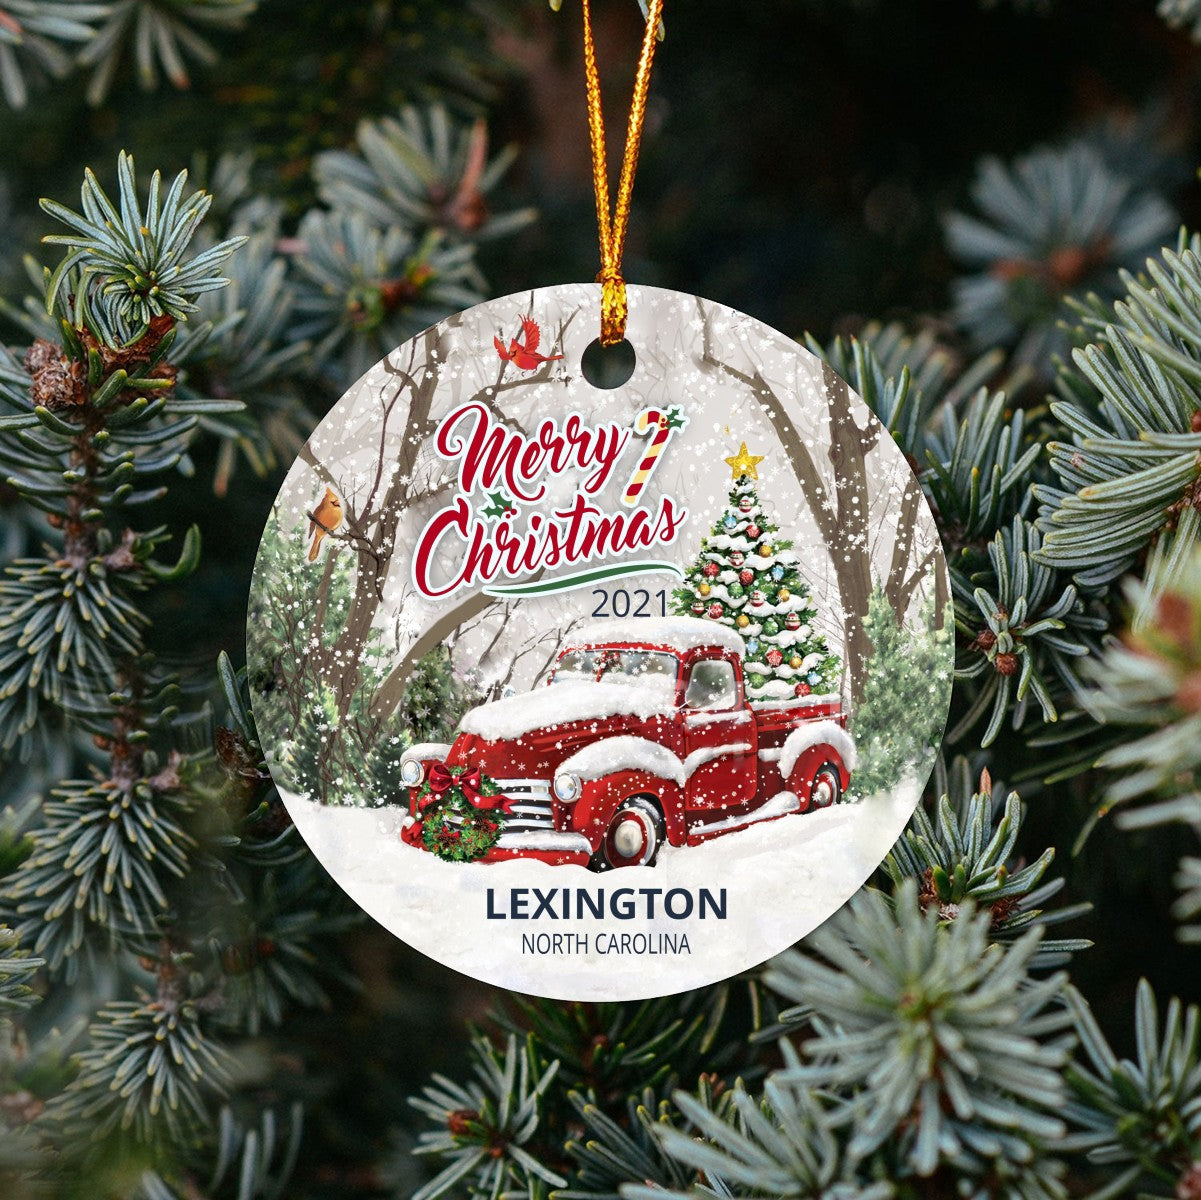 Christmas Tree Ornaments Lexington - Ornament Customize With Name City And State Lexington North Carolina NC - Red Truck Xmas Ornaments 3'' Plastic Gift For Family, Friend And Housewarming